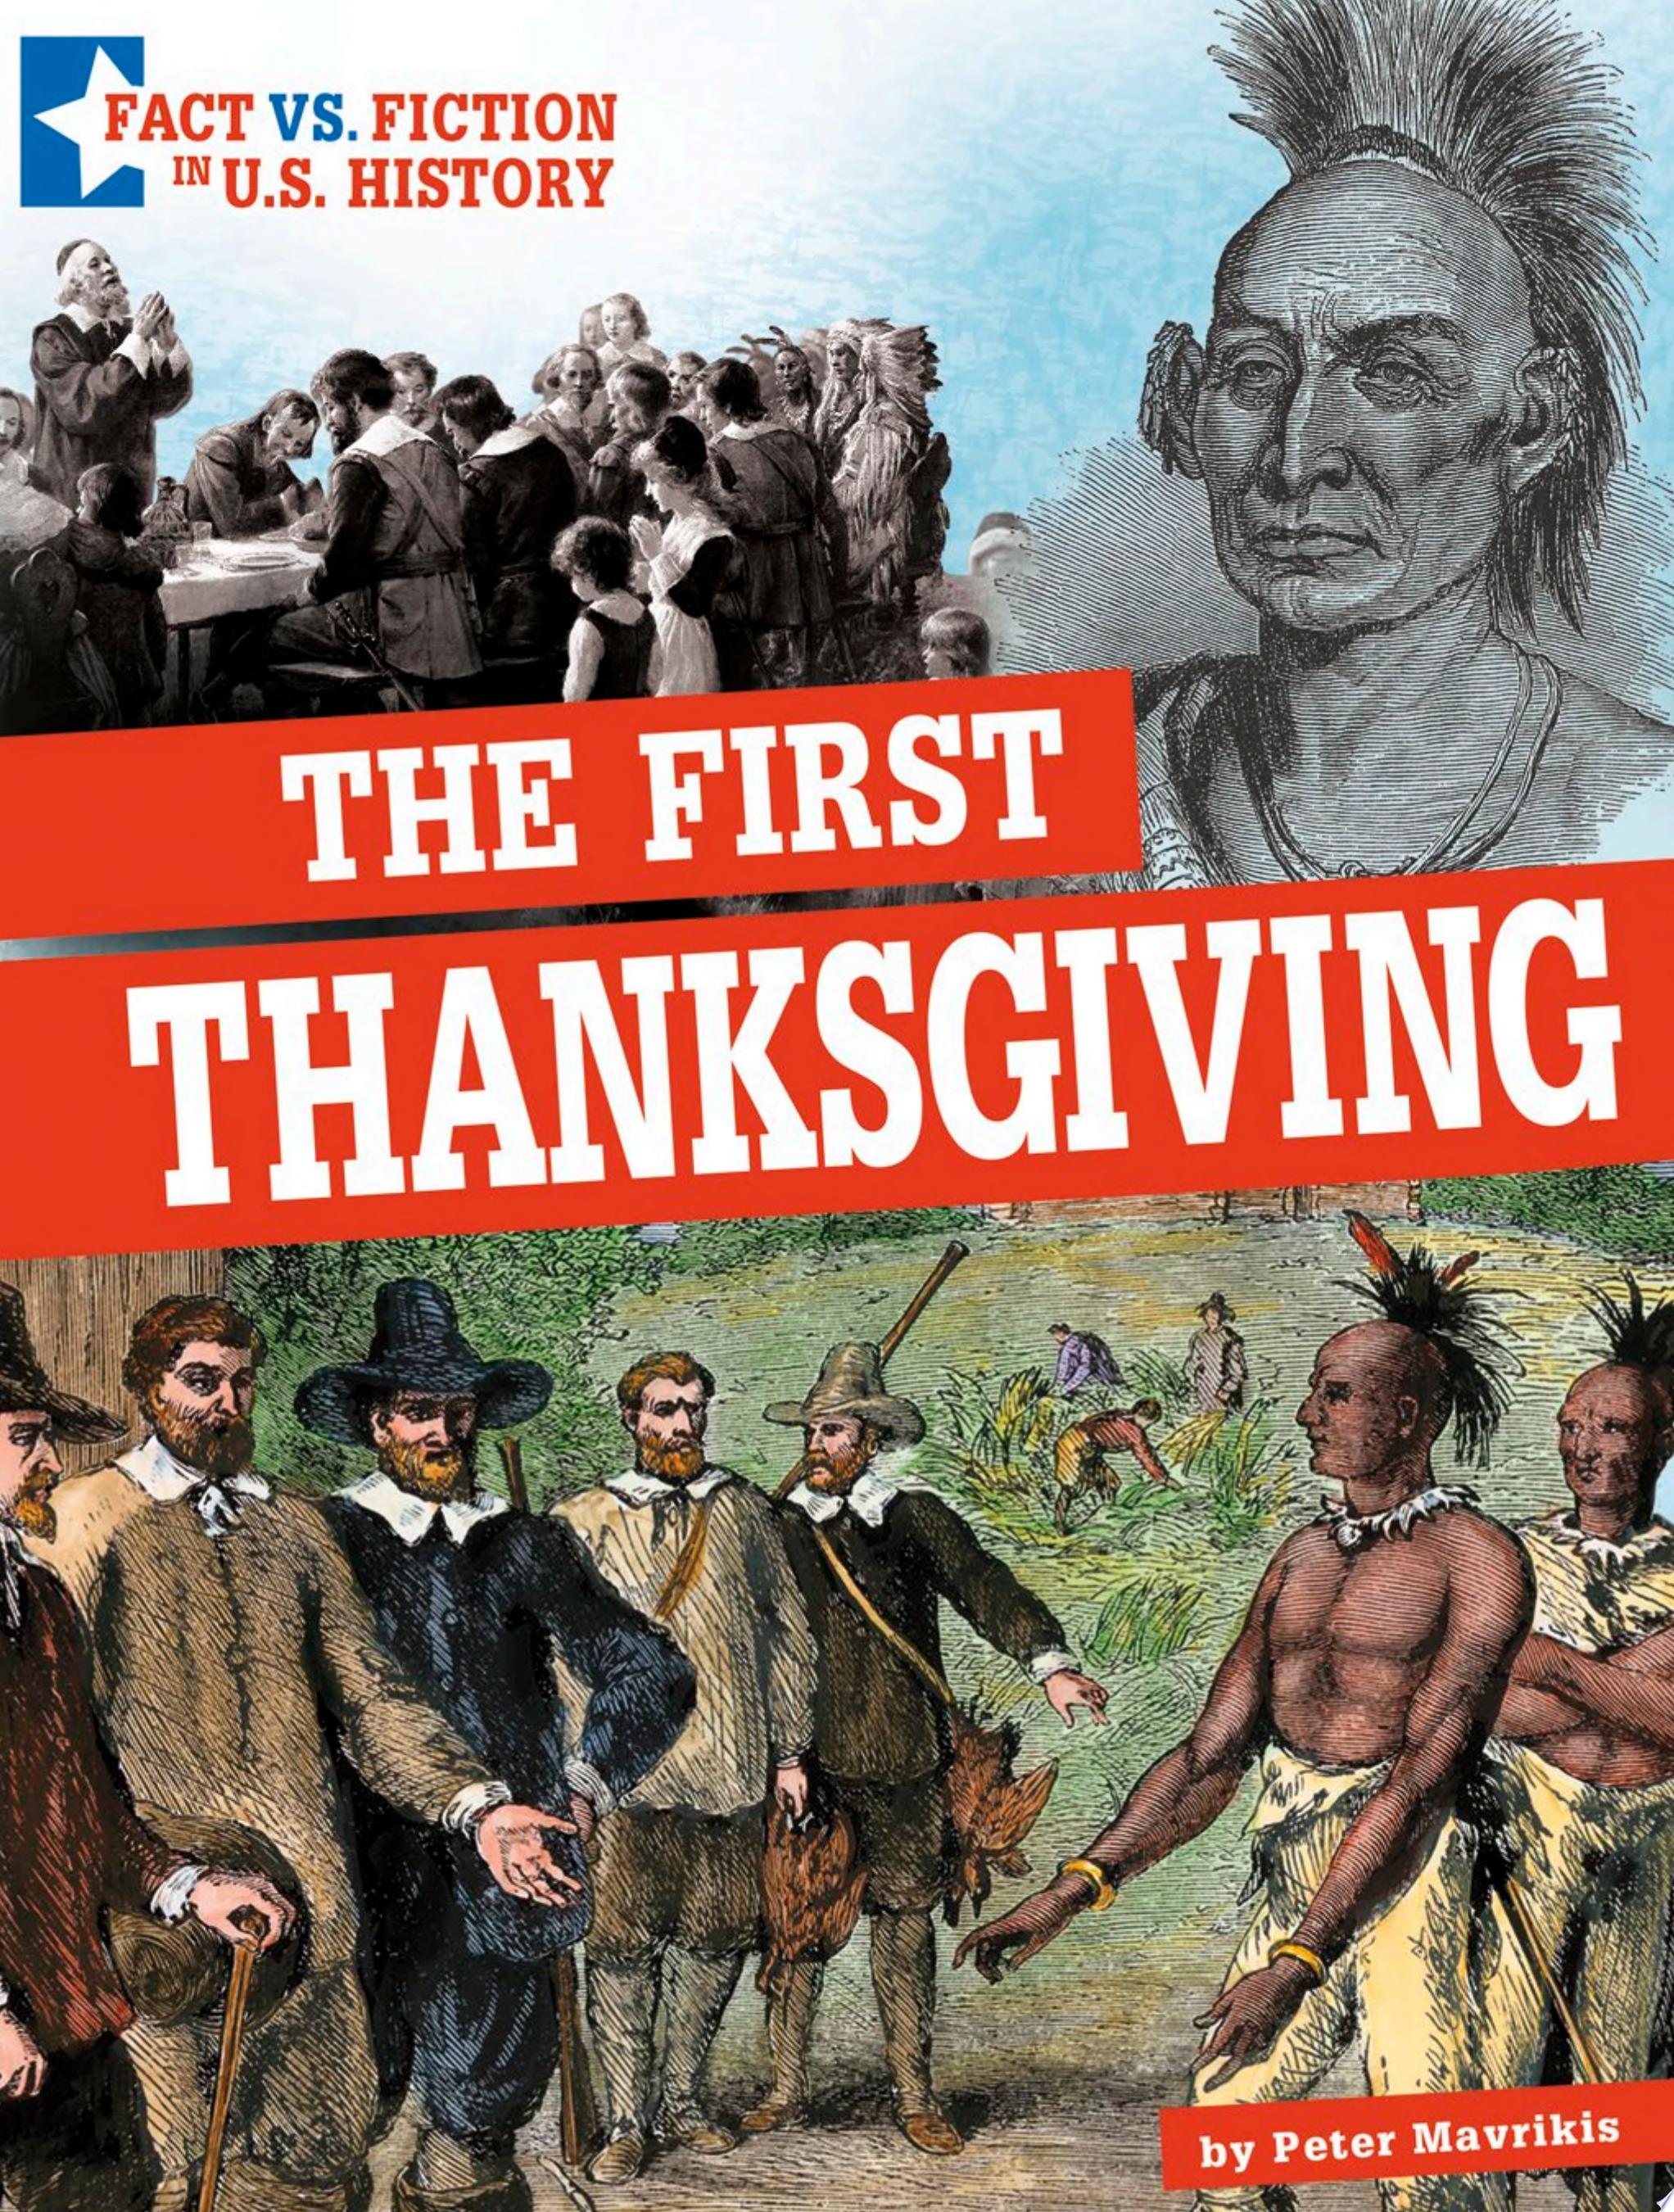 Image for "The First Thanksgiving"